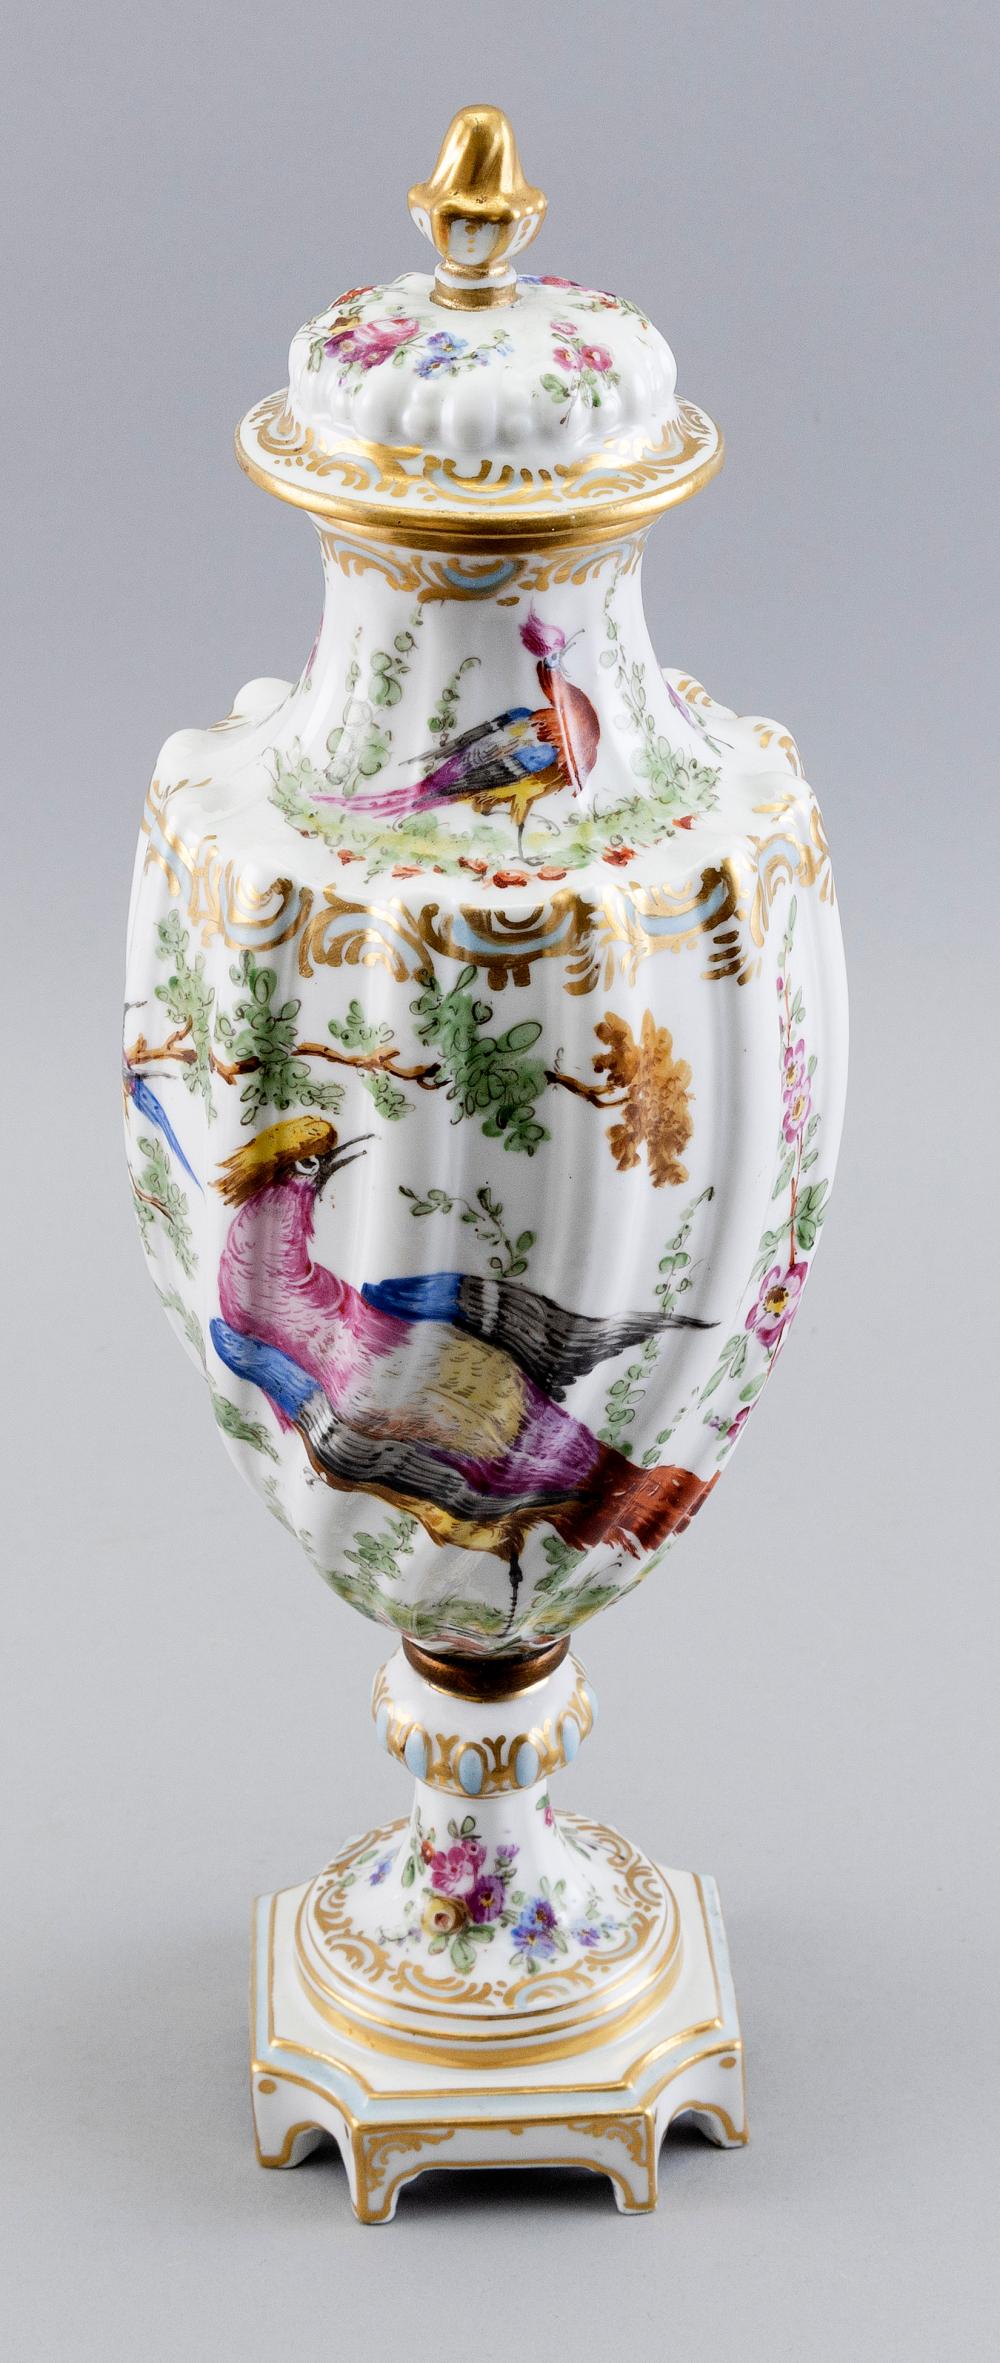 CHELSEA VASE ENGLAND, LATE 18TH